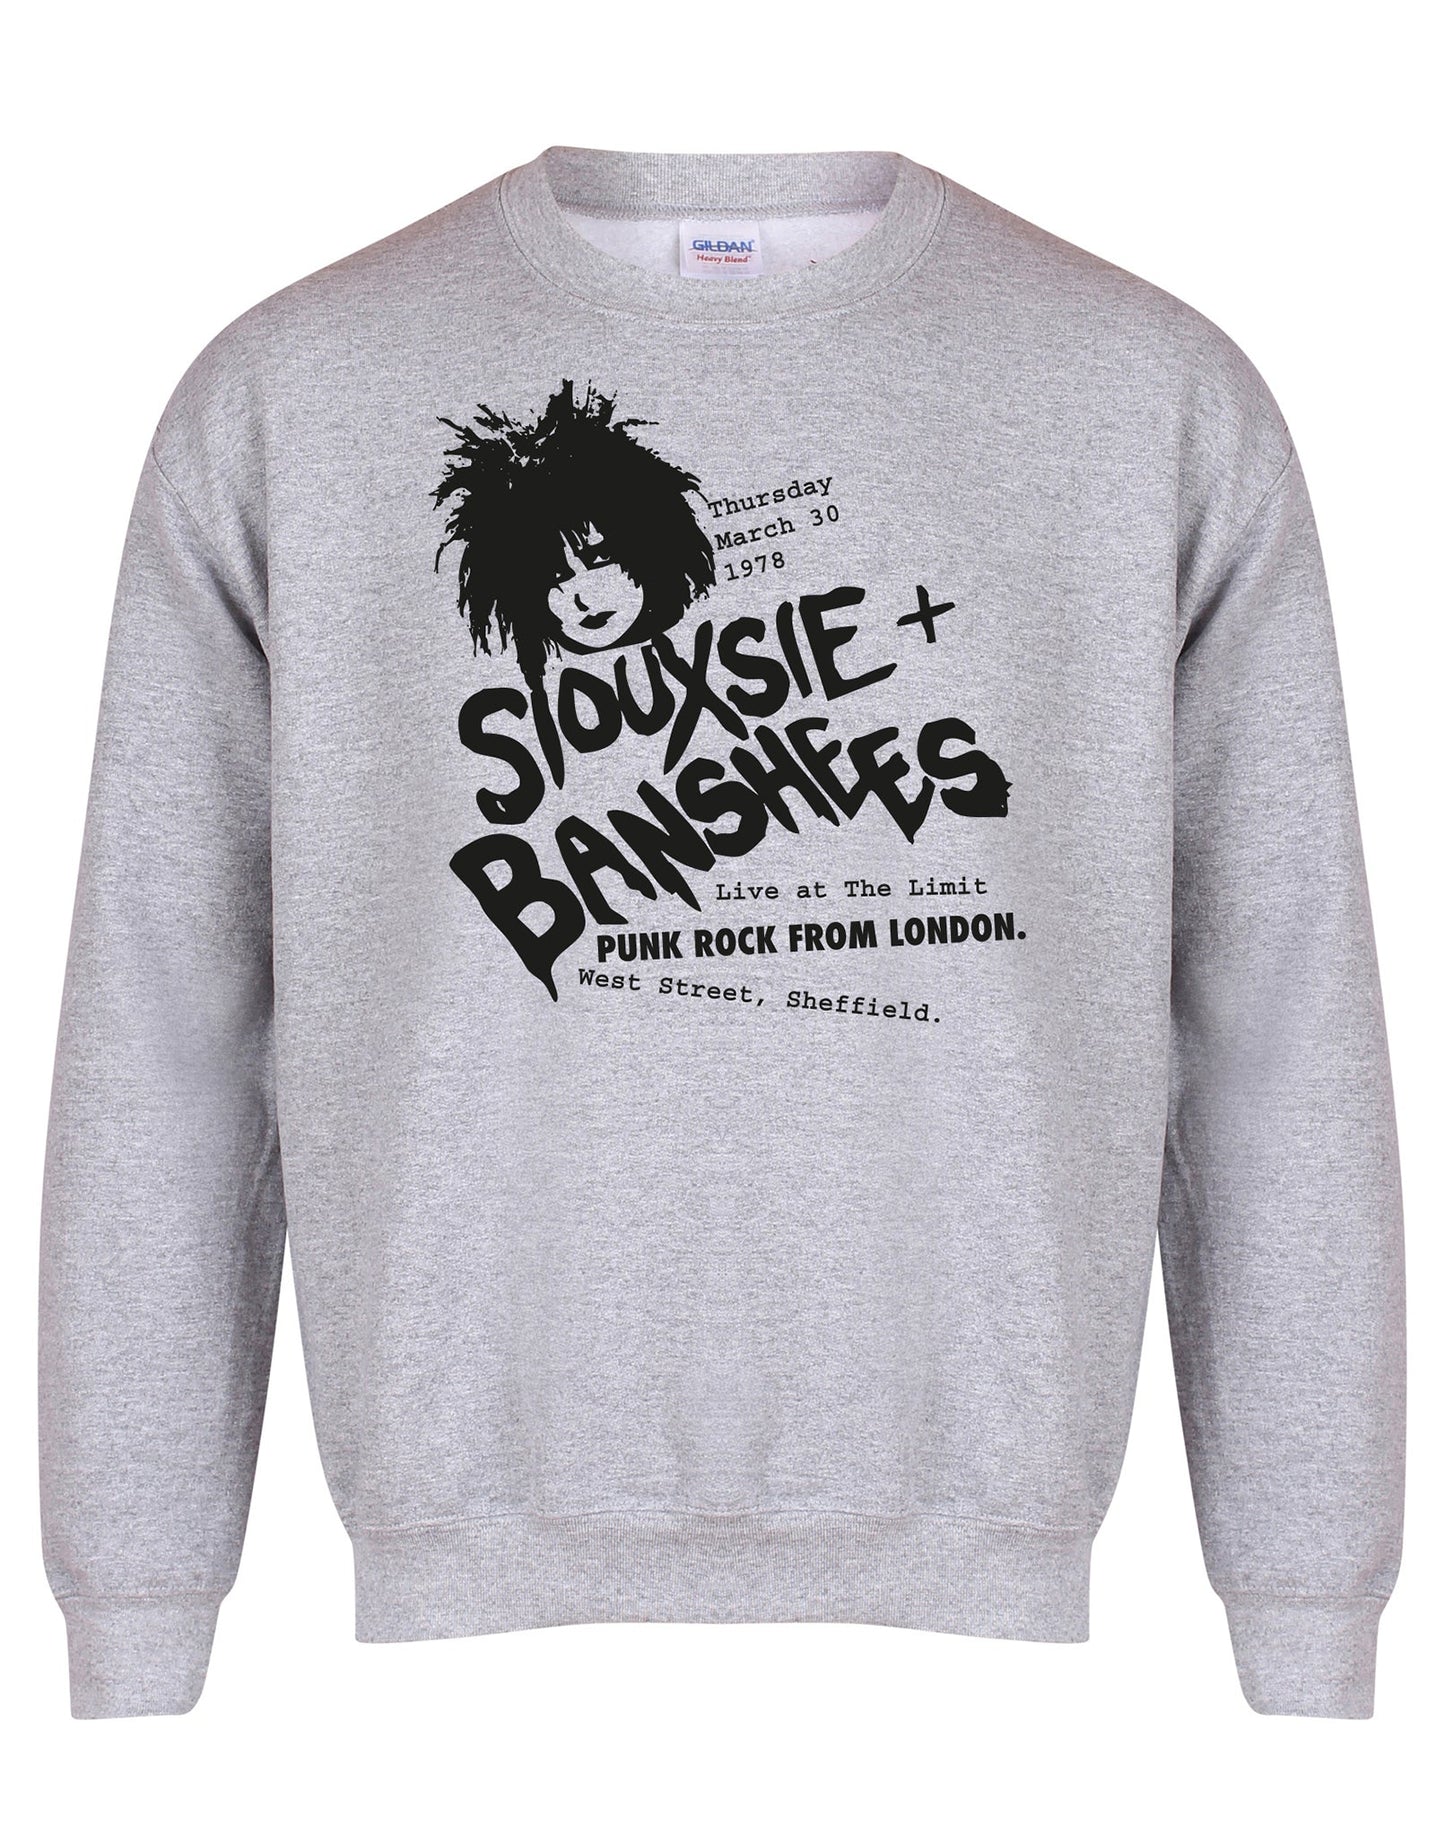 Siouxsie at the Limit unisex sweatshirt - various colours - Dirty Stop Outs